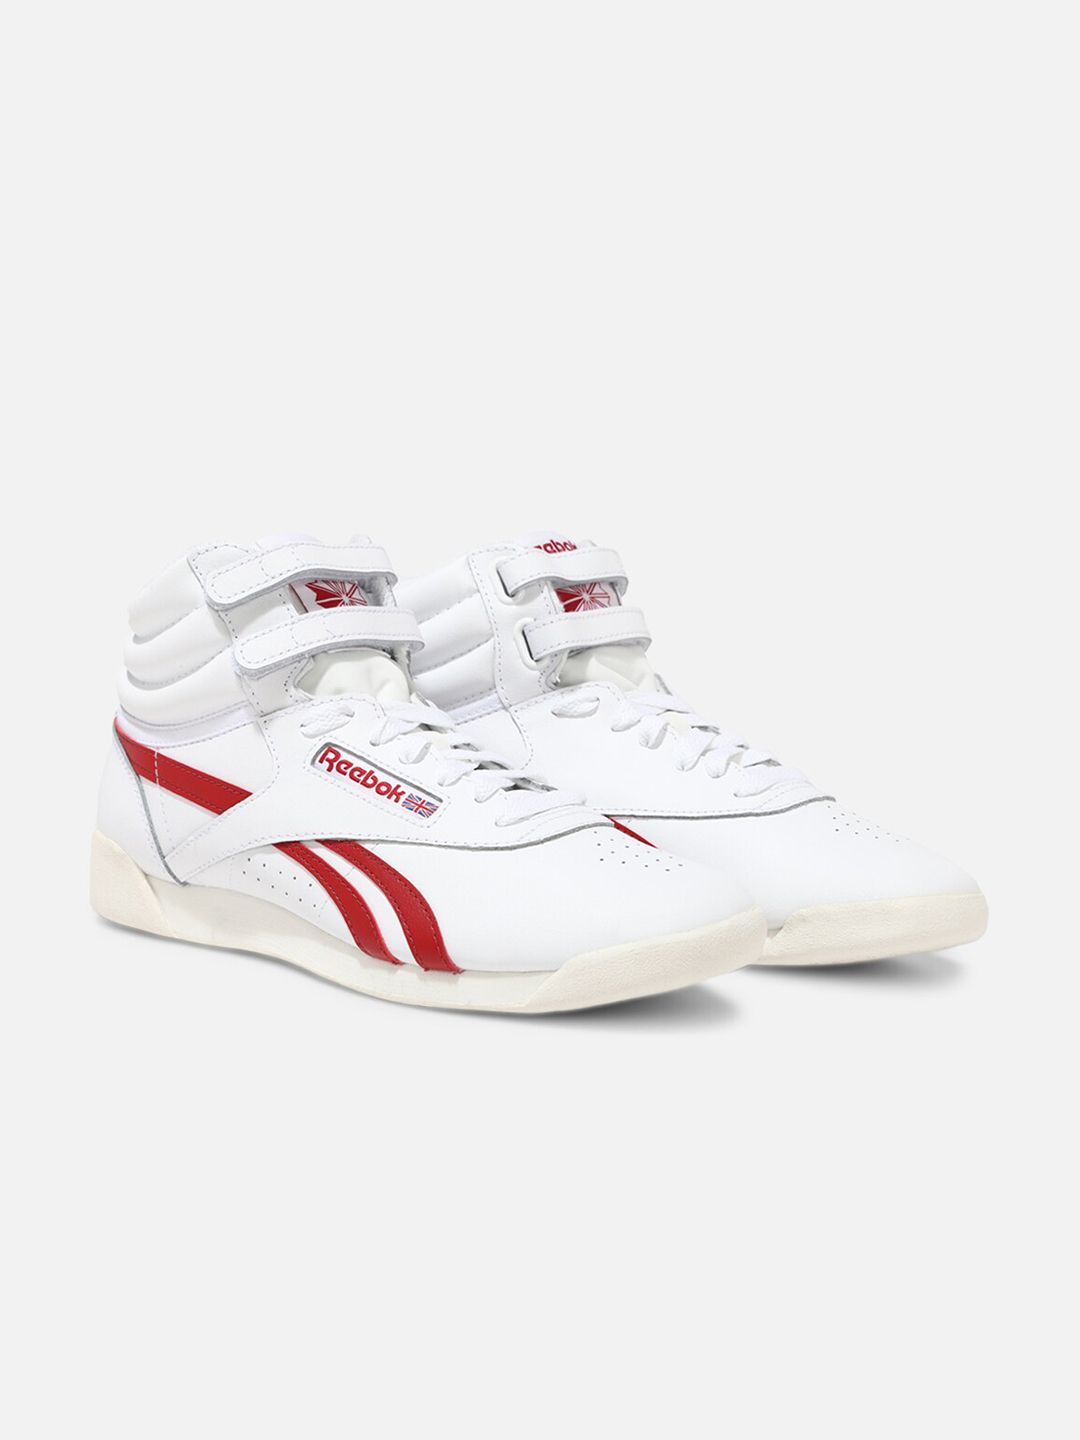 Reebok Women Rbk Classics F S HI Leather Running Shoes Price in India